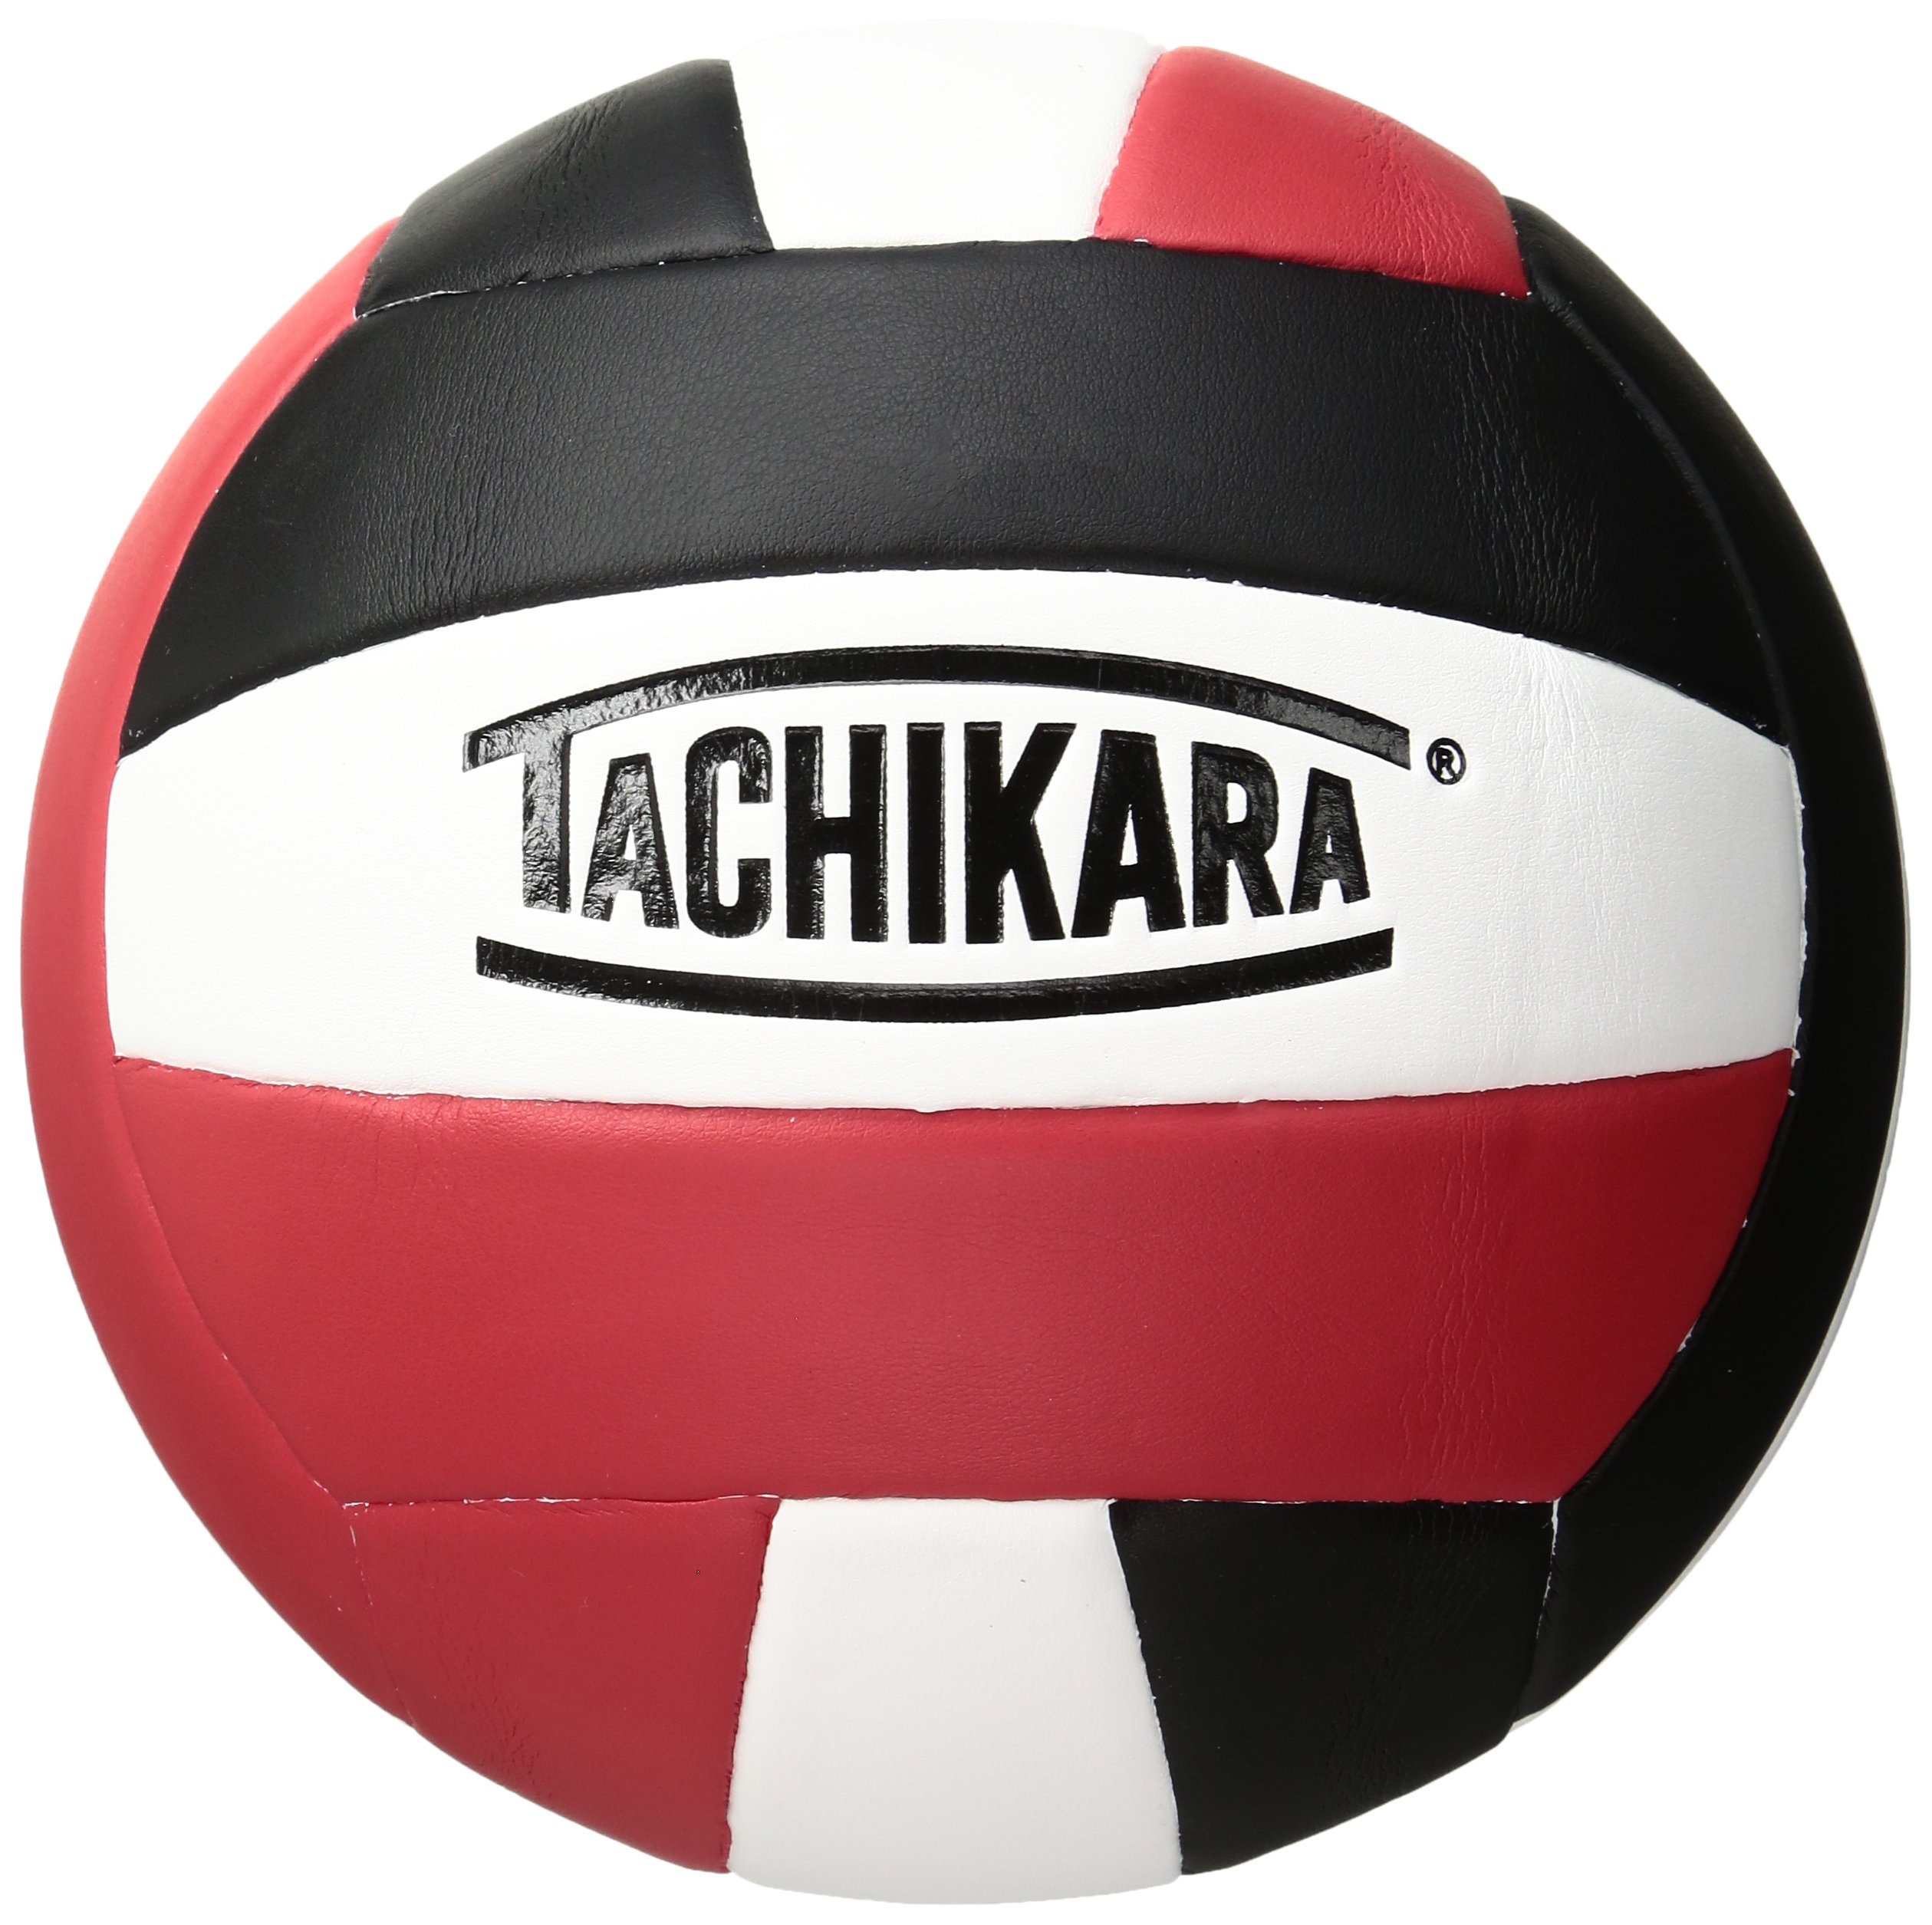 Tachikara SV18S Composite Leather Volleyball (Red White and Black)